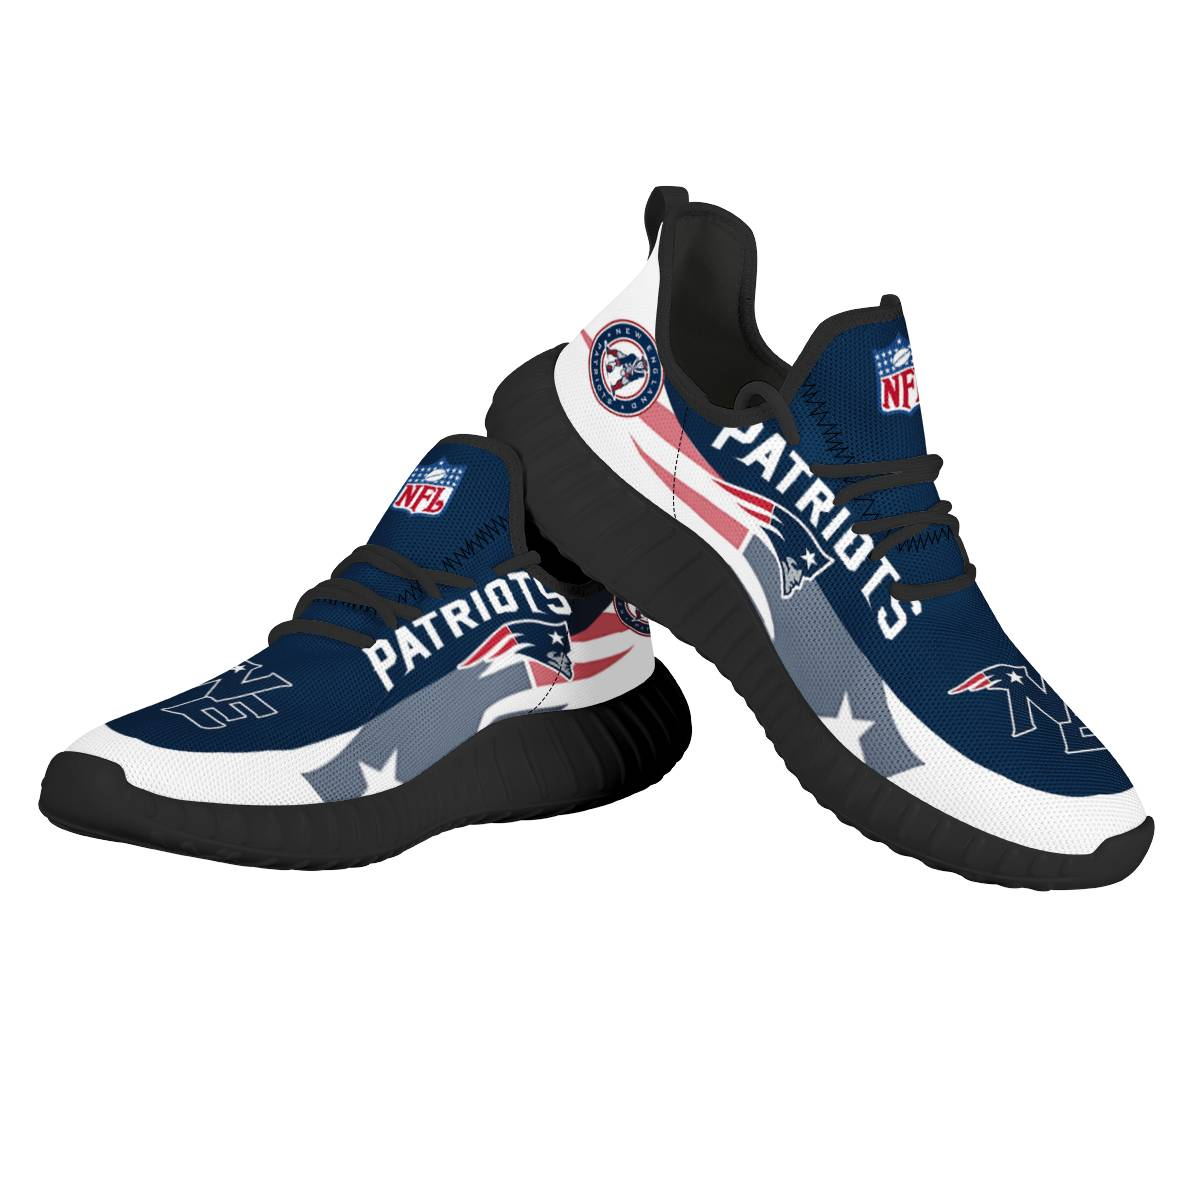 Women's NFL New England Patriots Mesh Knit Sneakers/Shoes 009